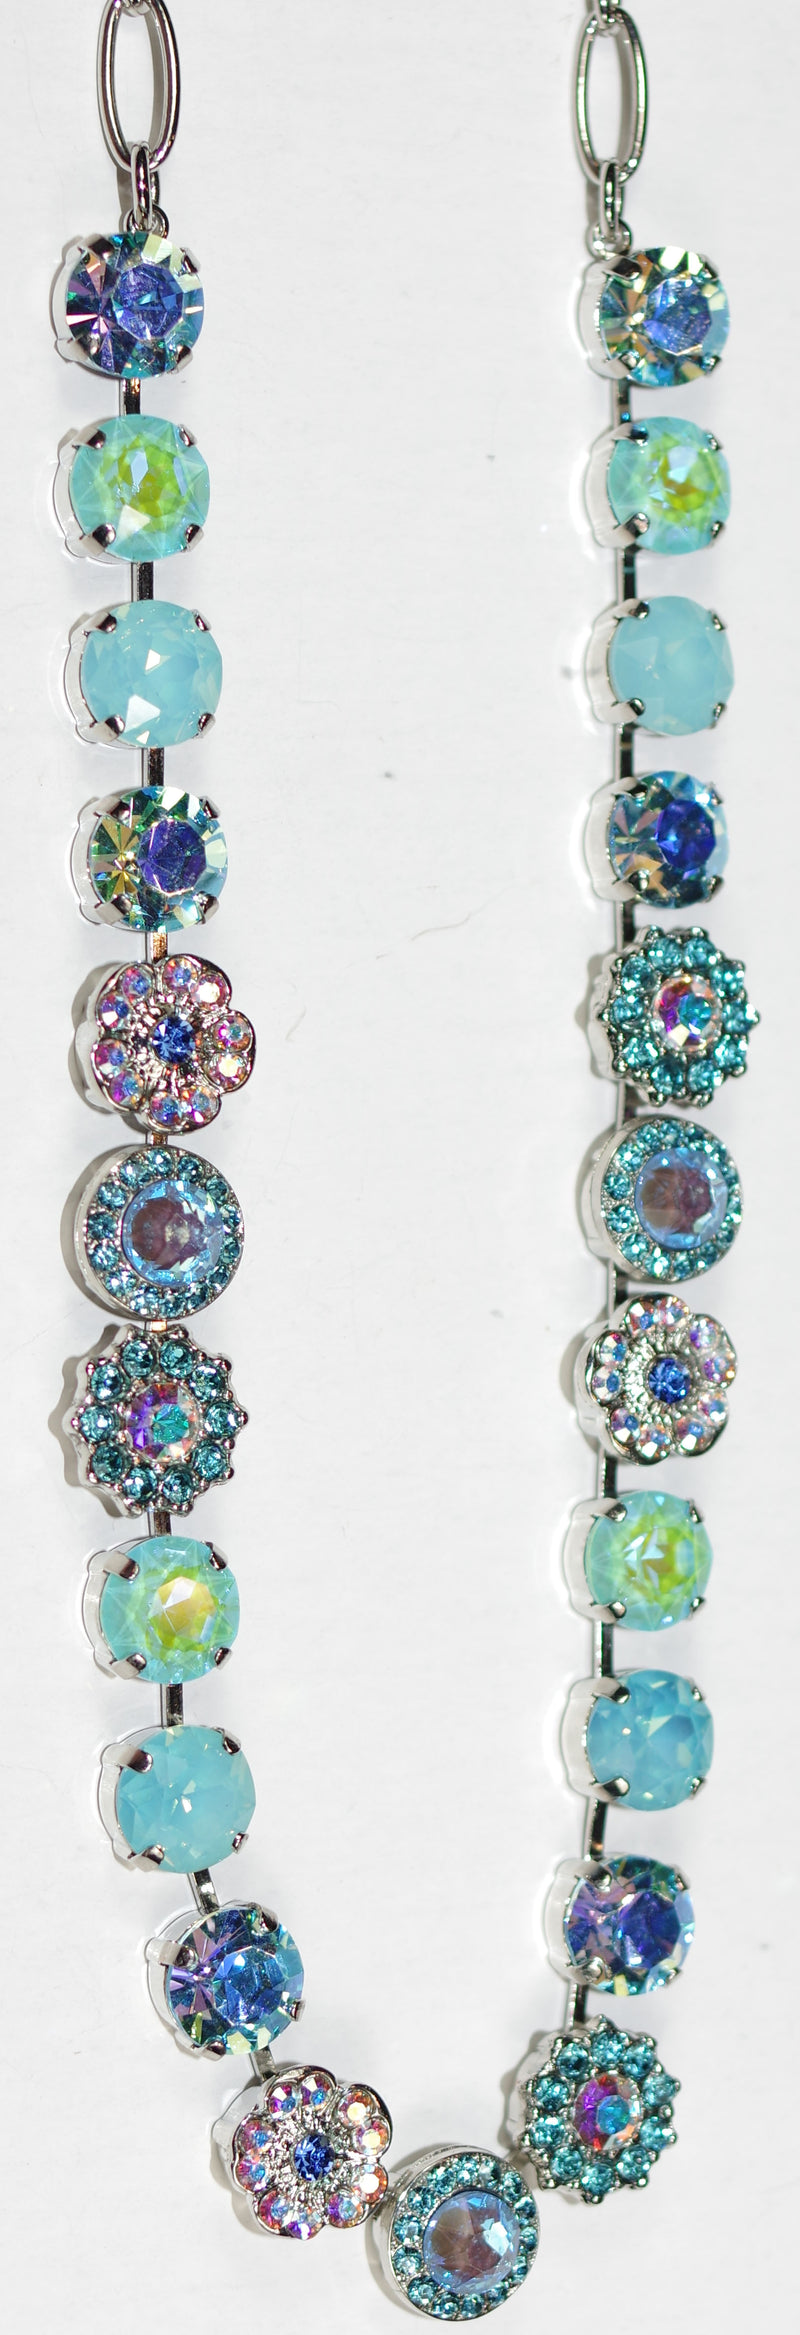 MARIANA NECKLACE TRANQUIL: teal, blue sun kissed 1/2" stones in silver rhodium setting, 18" adjustable chain